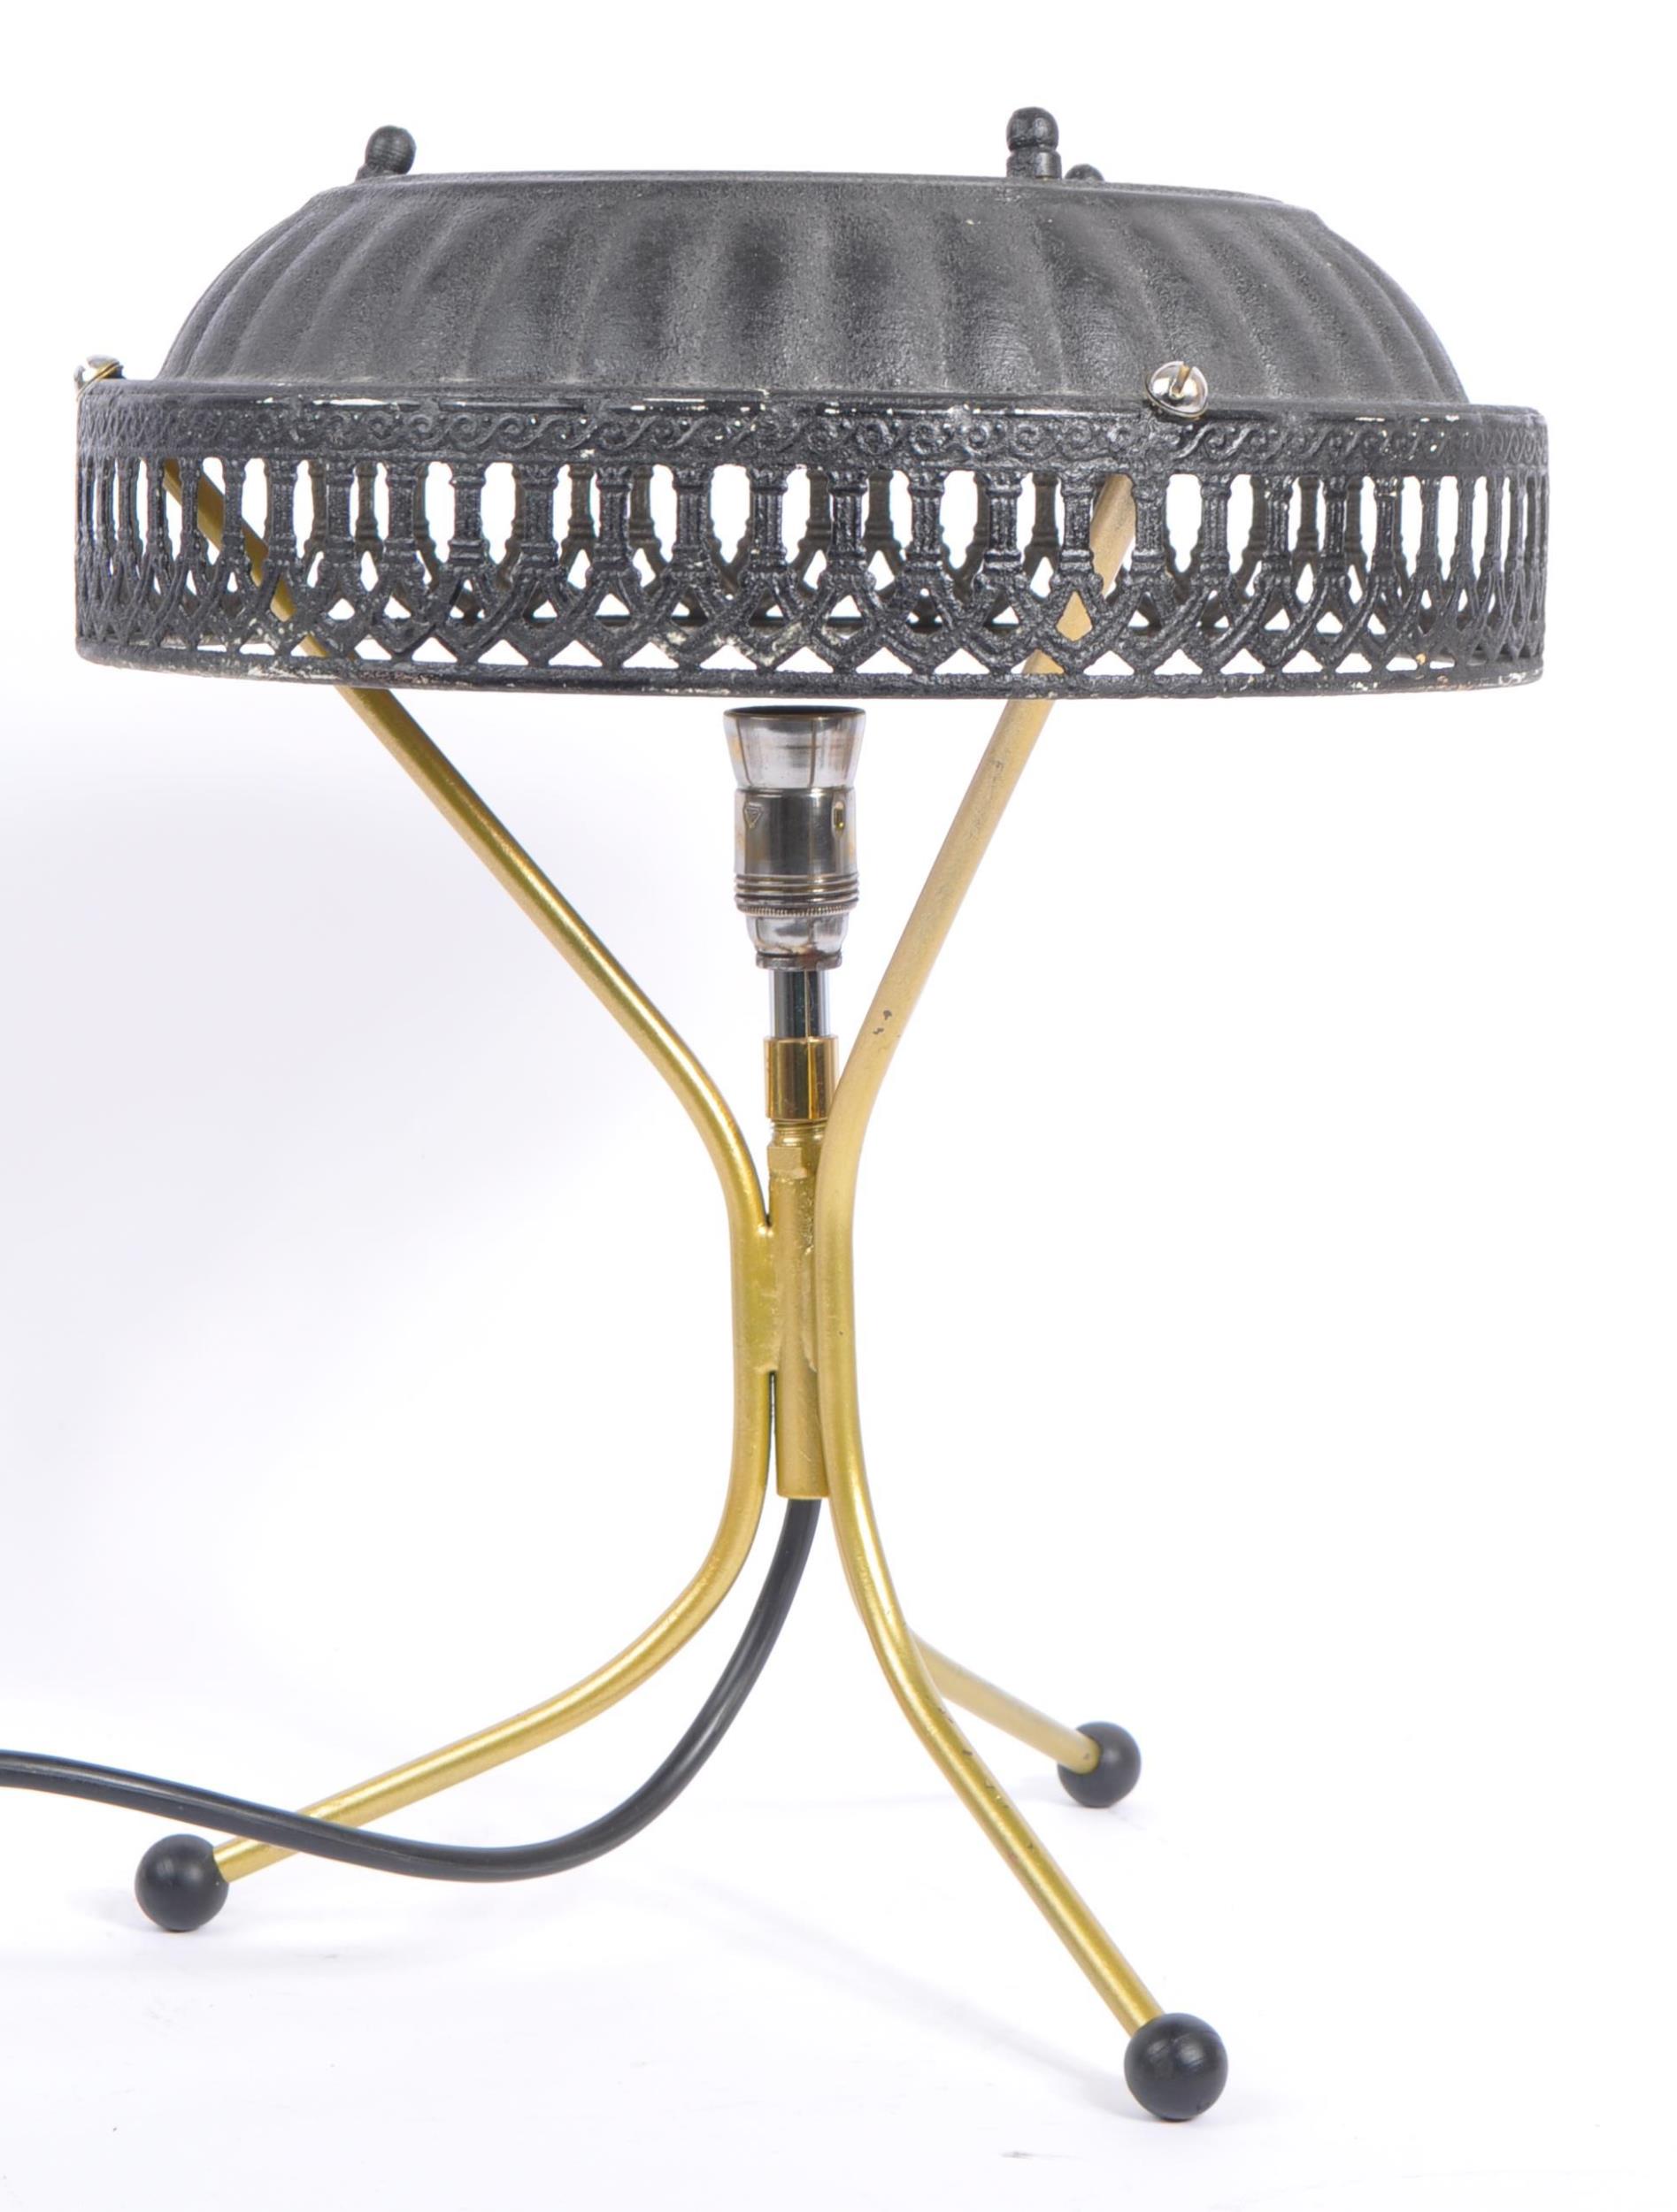 LATER 20TH CENTURY BRASS TRIPOD TABLE LAMP - Image 2 of 5